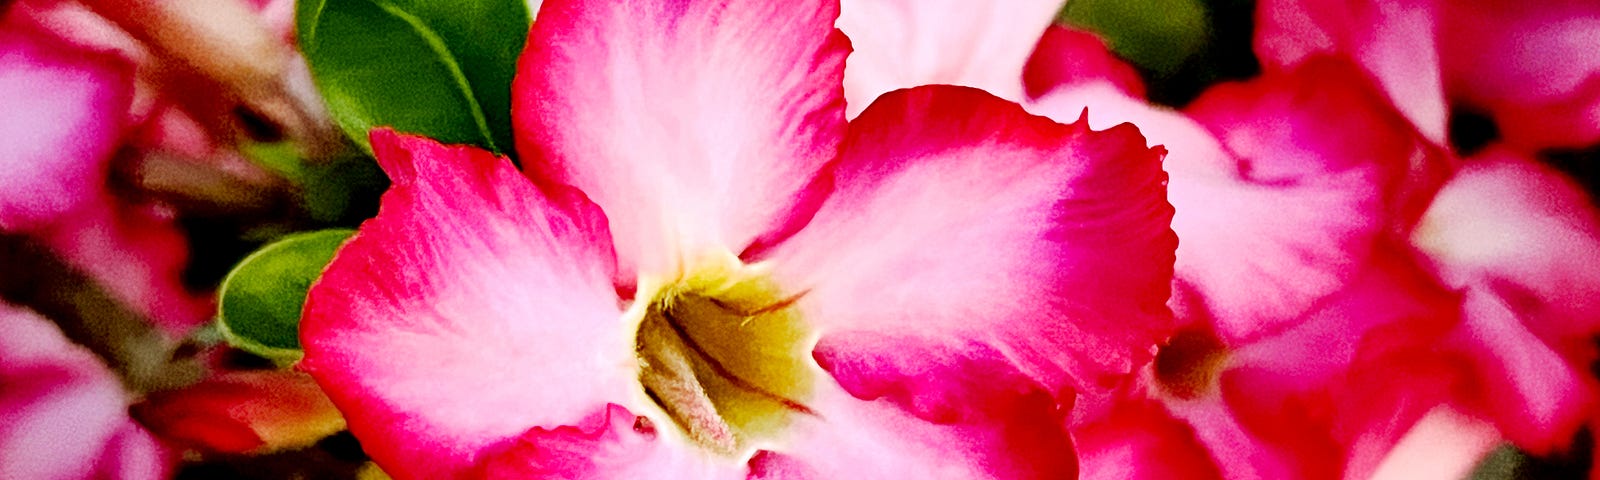 A beautiful blossoming pink flower with white streaks and a yellow center